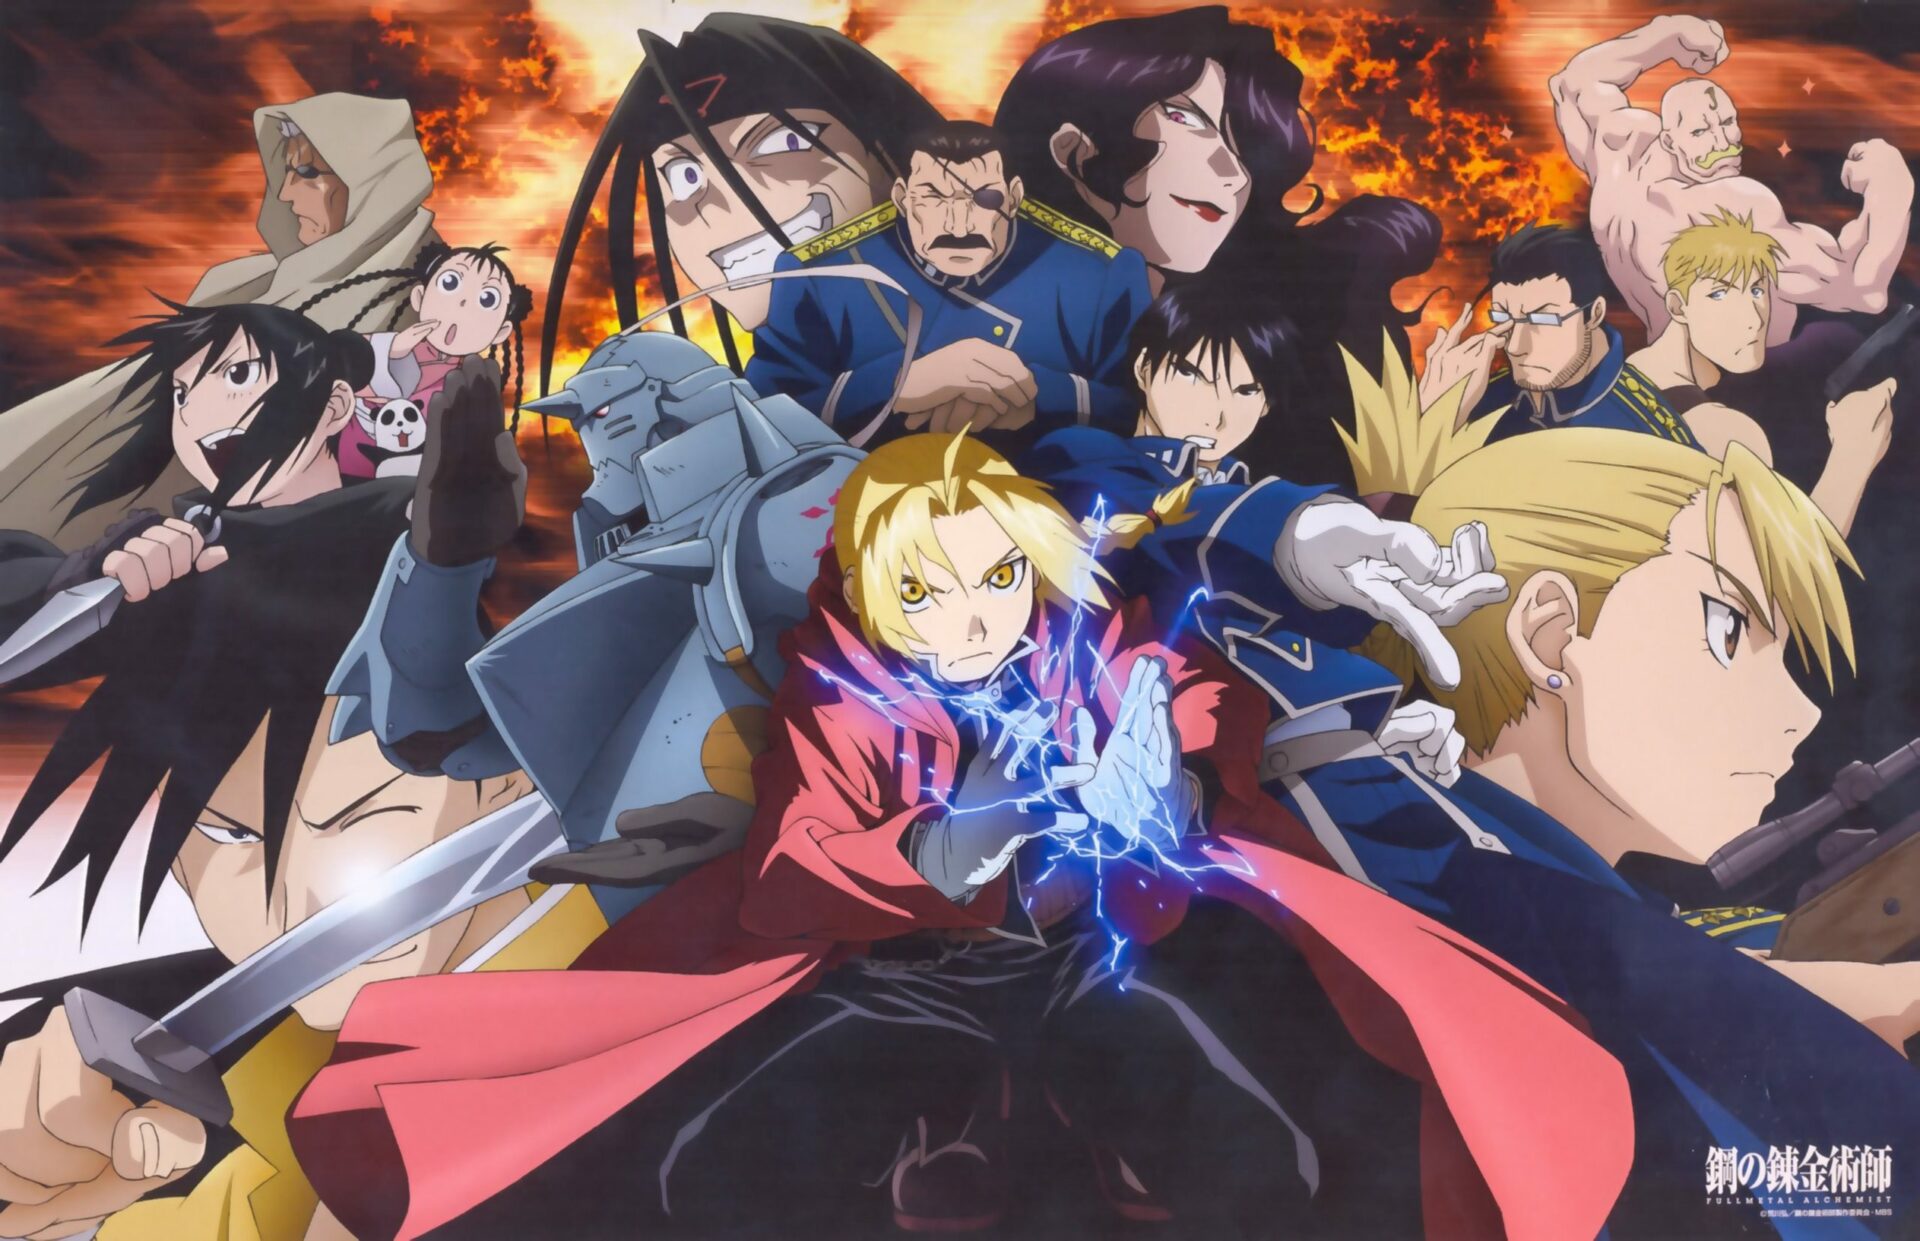 Top 20 Anime Storylines of All Time & Where To Watch Them!